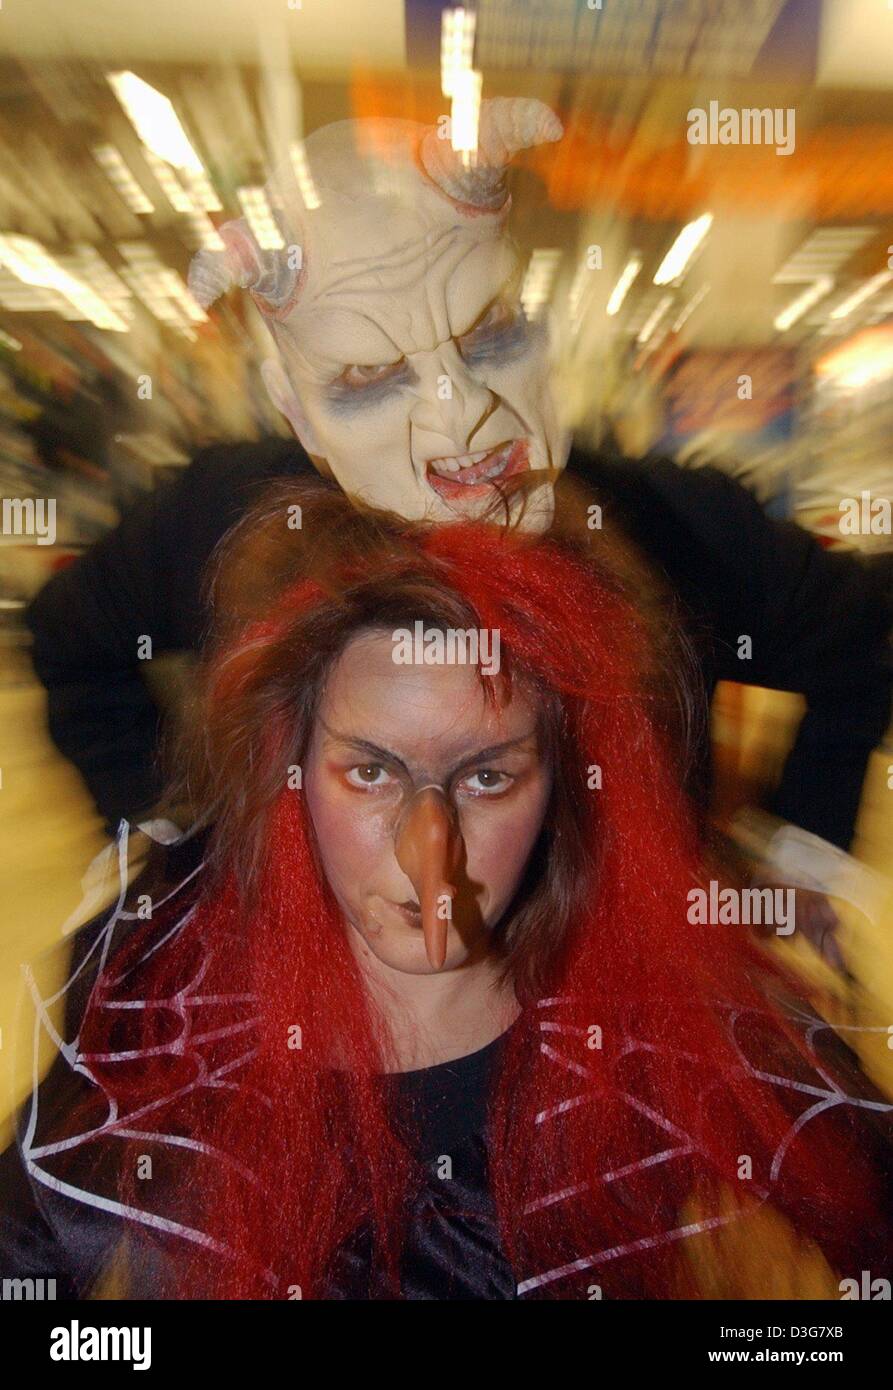 (dpa) - Shop assistants dressed up as a devil and a witch are scaring the customers in a Wal Mart supermarket in Hamburg, 31 October 2003. At the entrance, customers had to pass through a dark tunnel of horror draped with cobwebs and it became evident that shopping on Halloween was not a task for anxious people. Inside, the customers were greeted by a devil and for information they Stock Photo